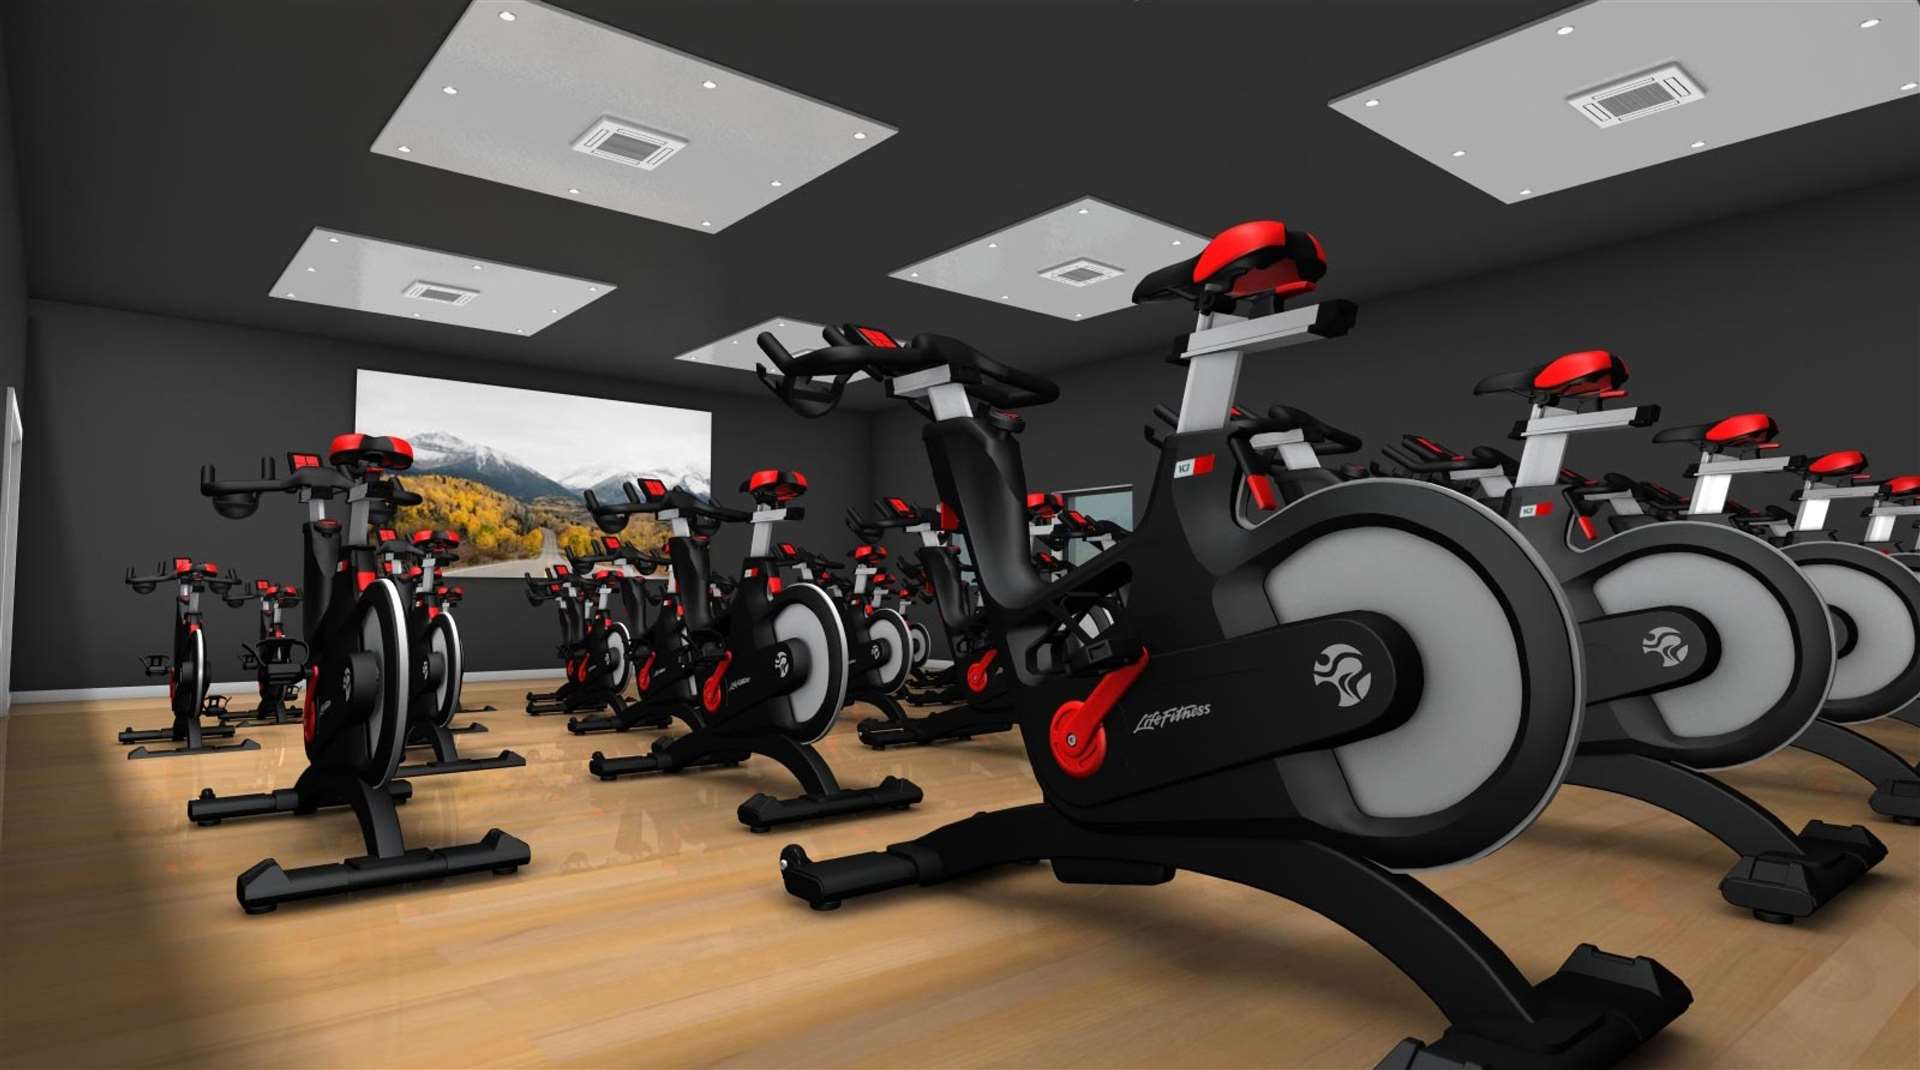 The plans include new exercise studios